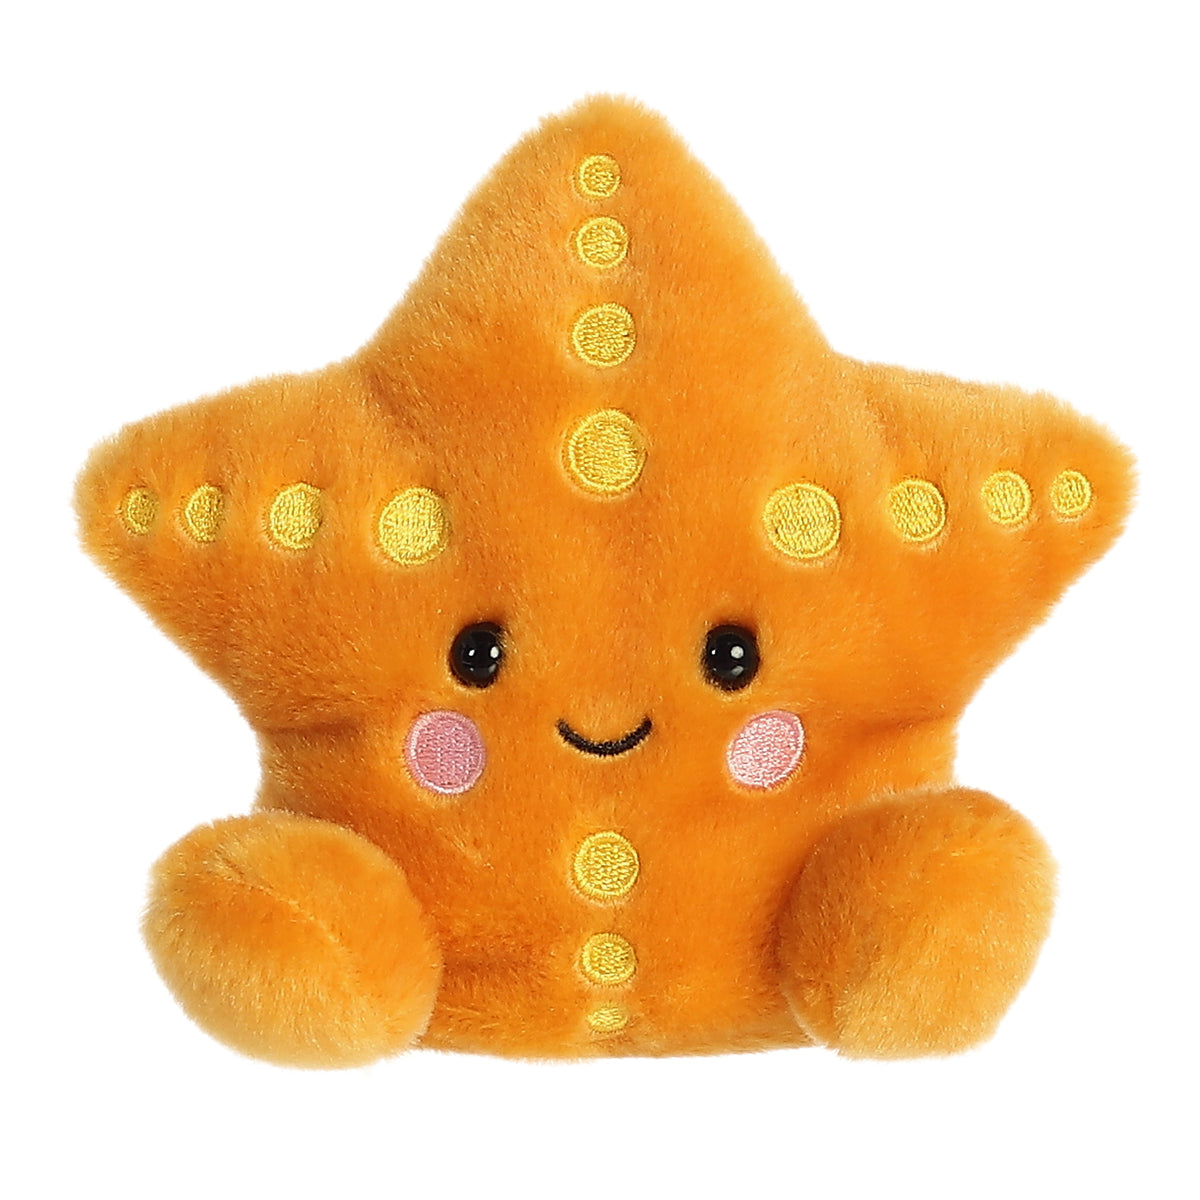 Starfish plush from Palm Pals gleaming in a golden hue with vibrant yellow details, and fits in the palm of your hand.